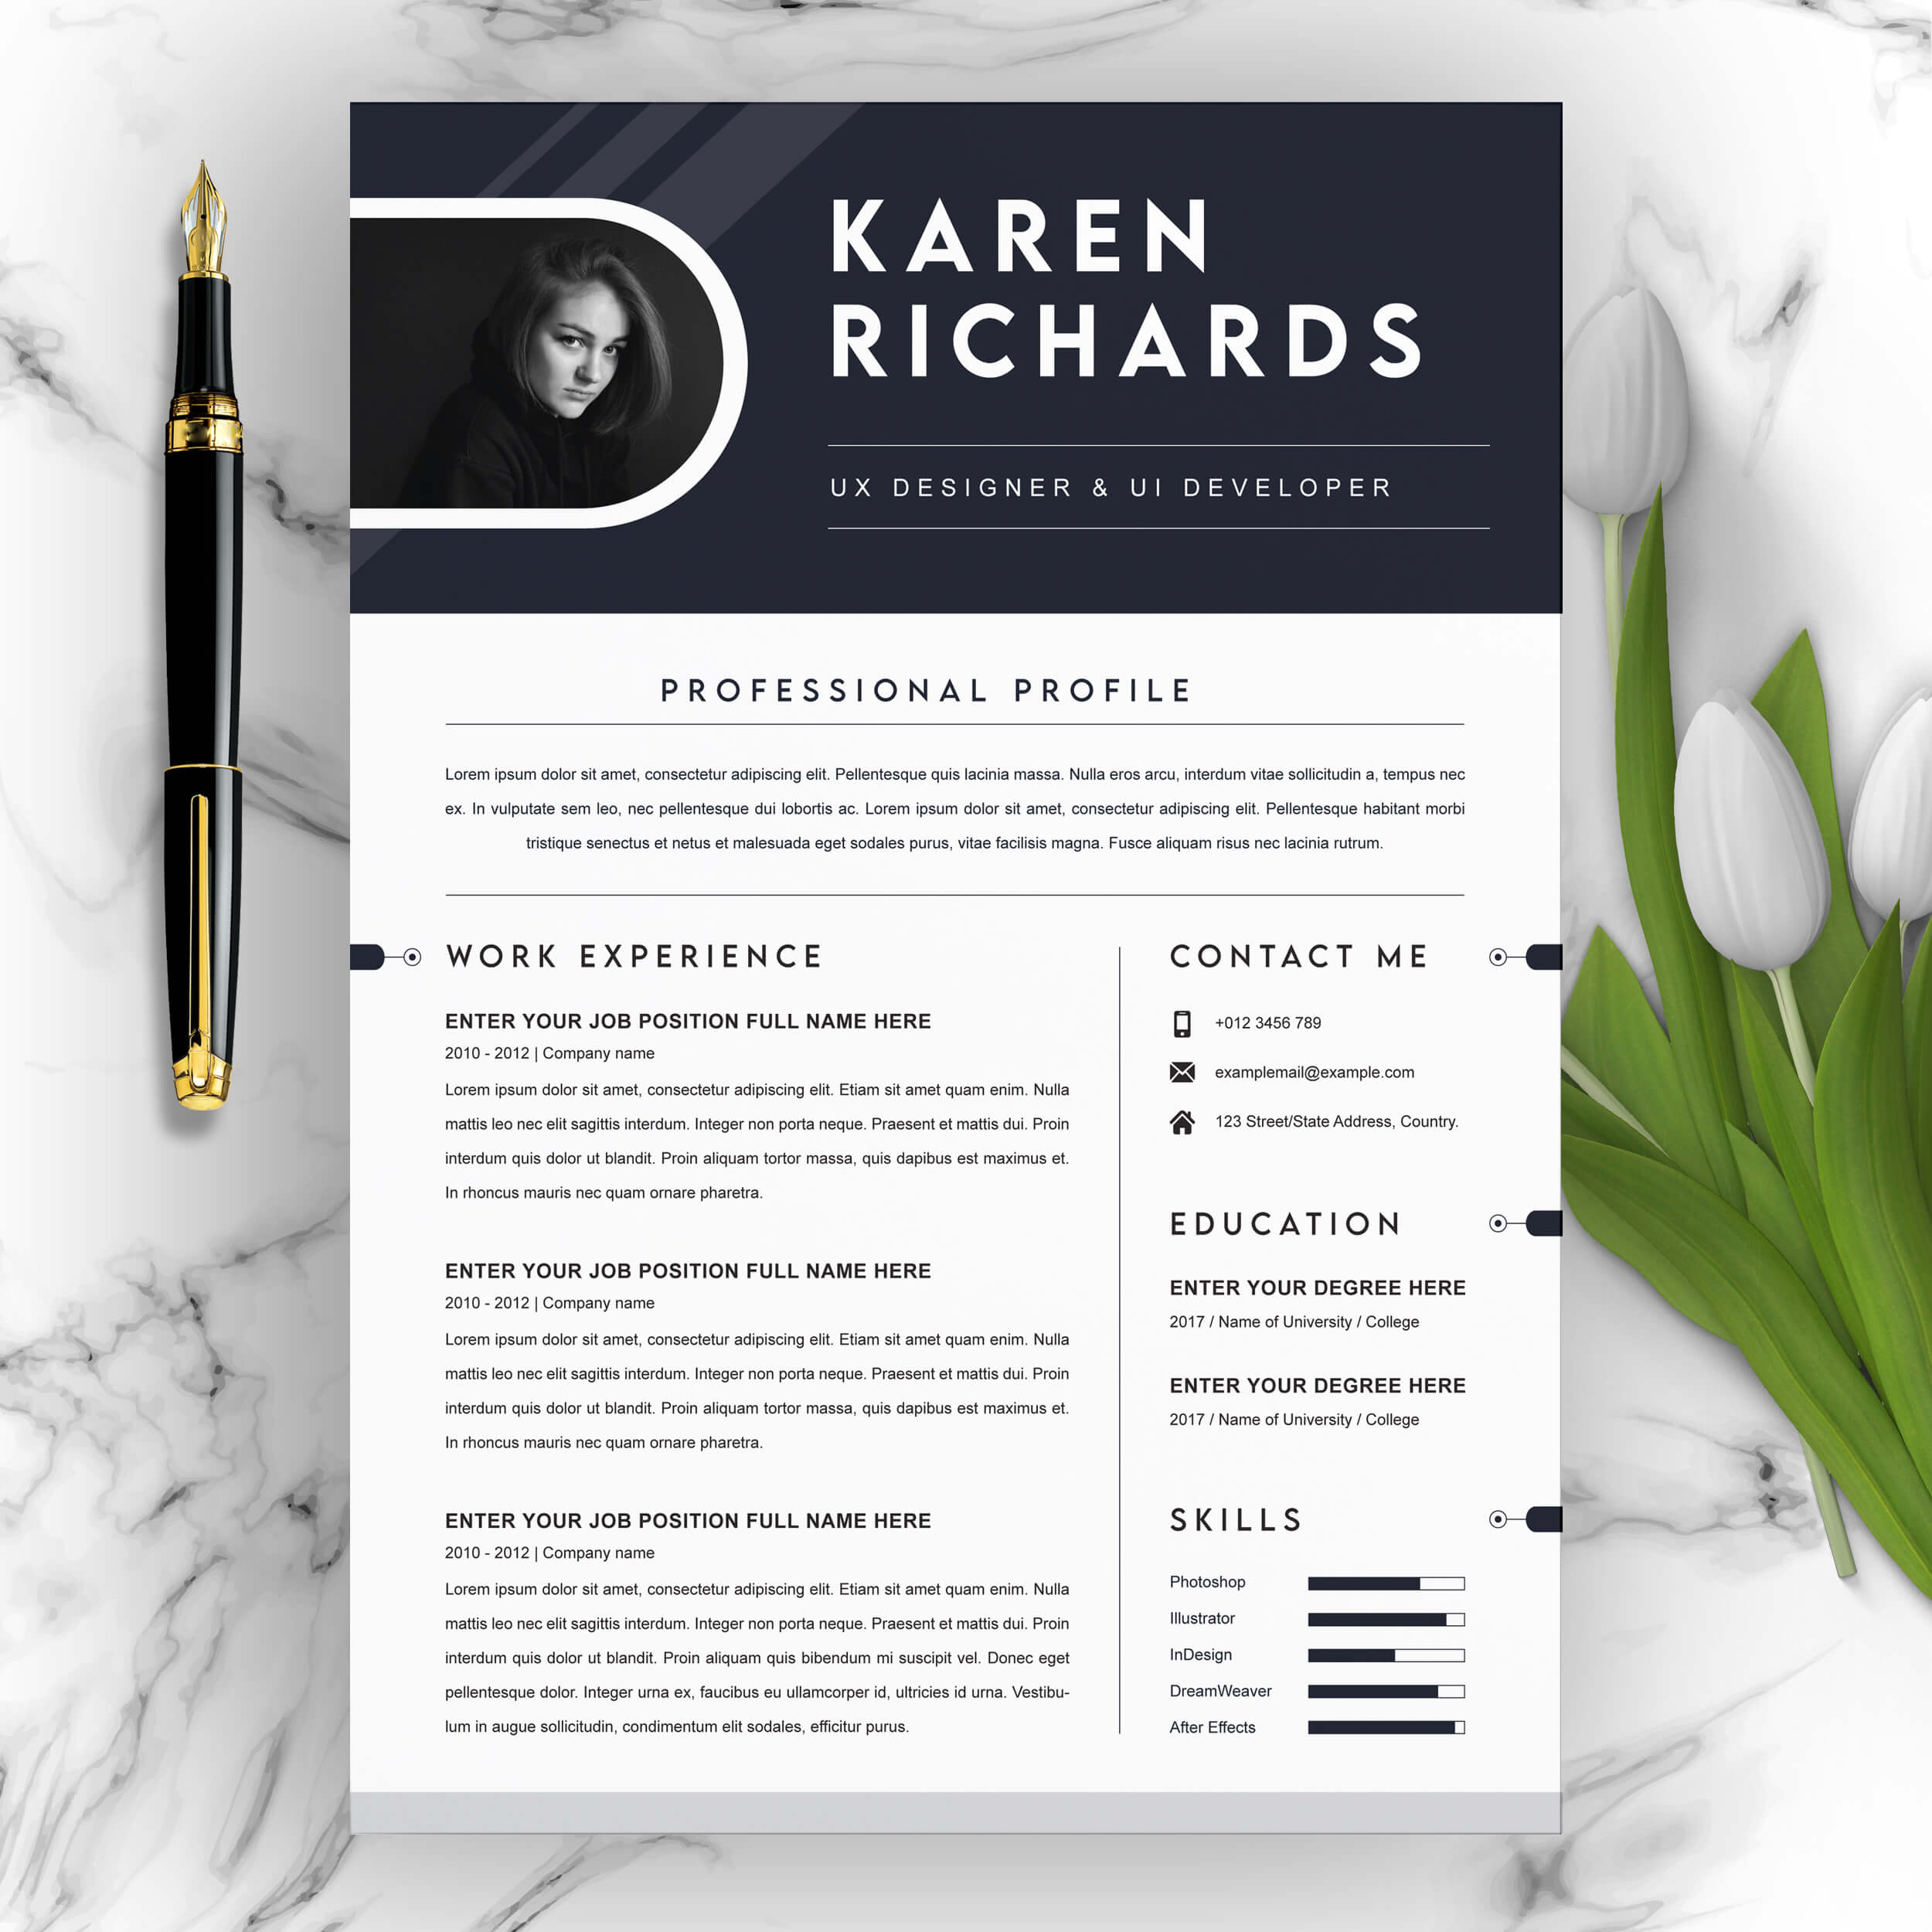 Professional and Clean Resume Template | Resume Word Template cover image.